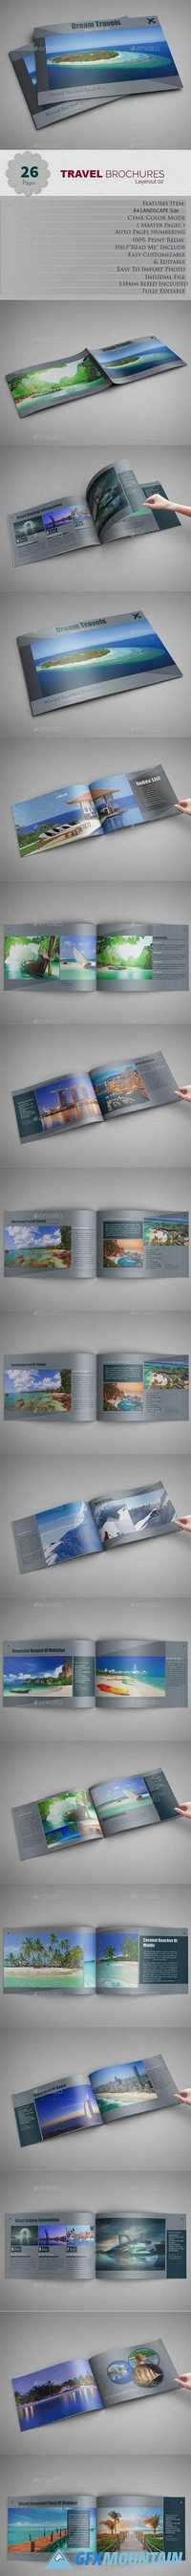 Travel Brochures Layerout 2 20906303